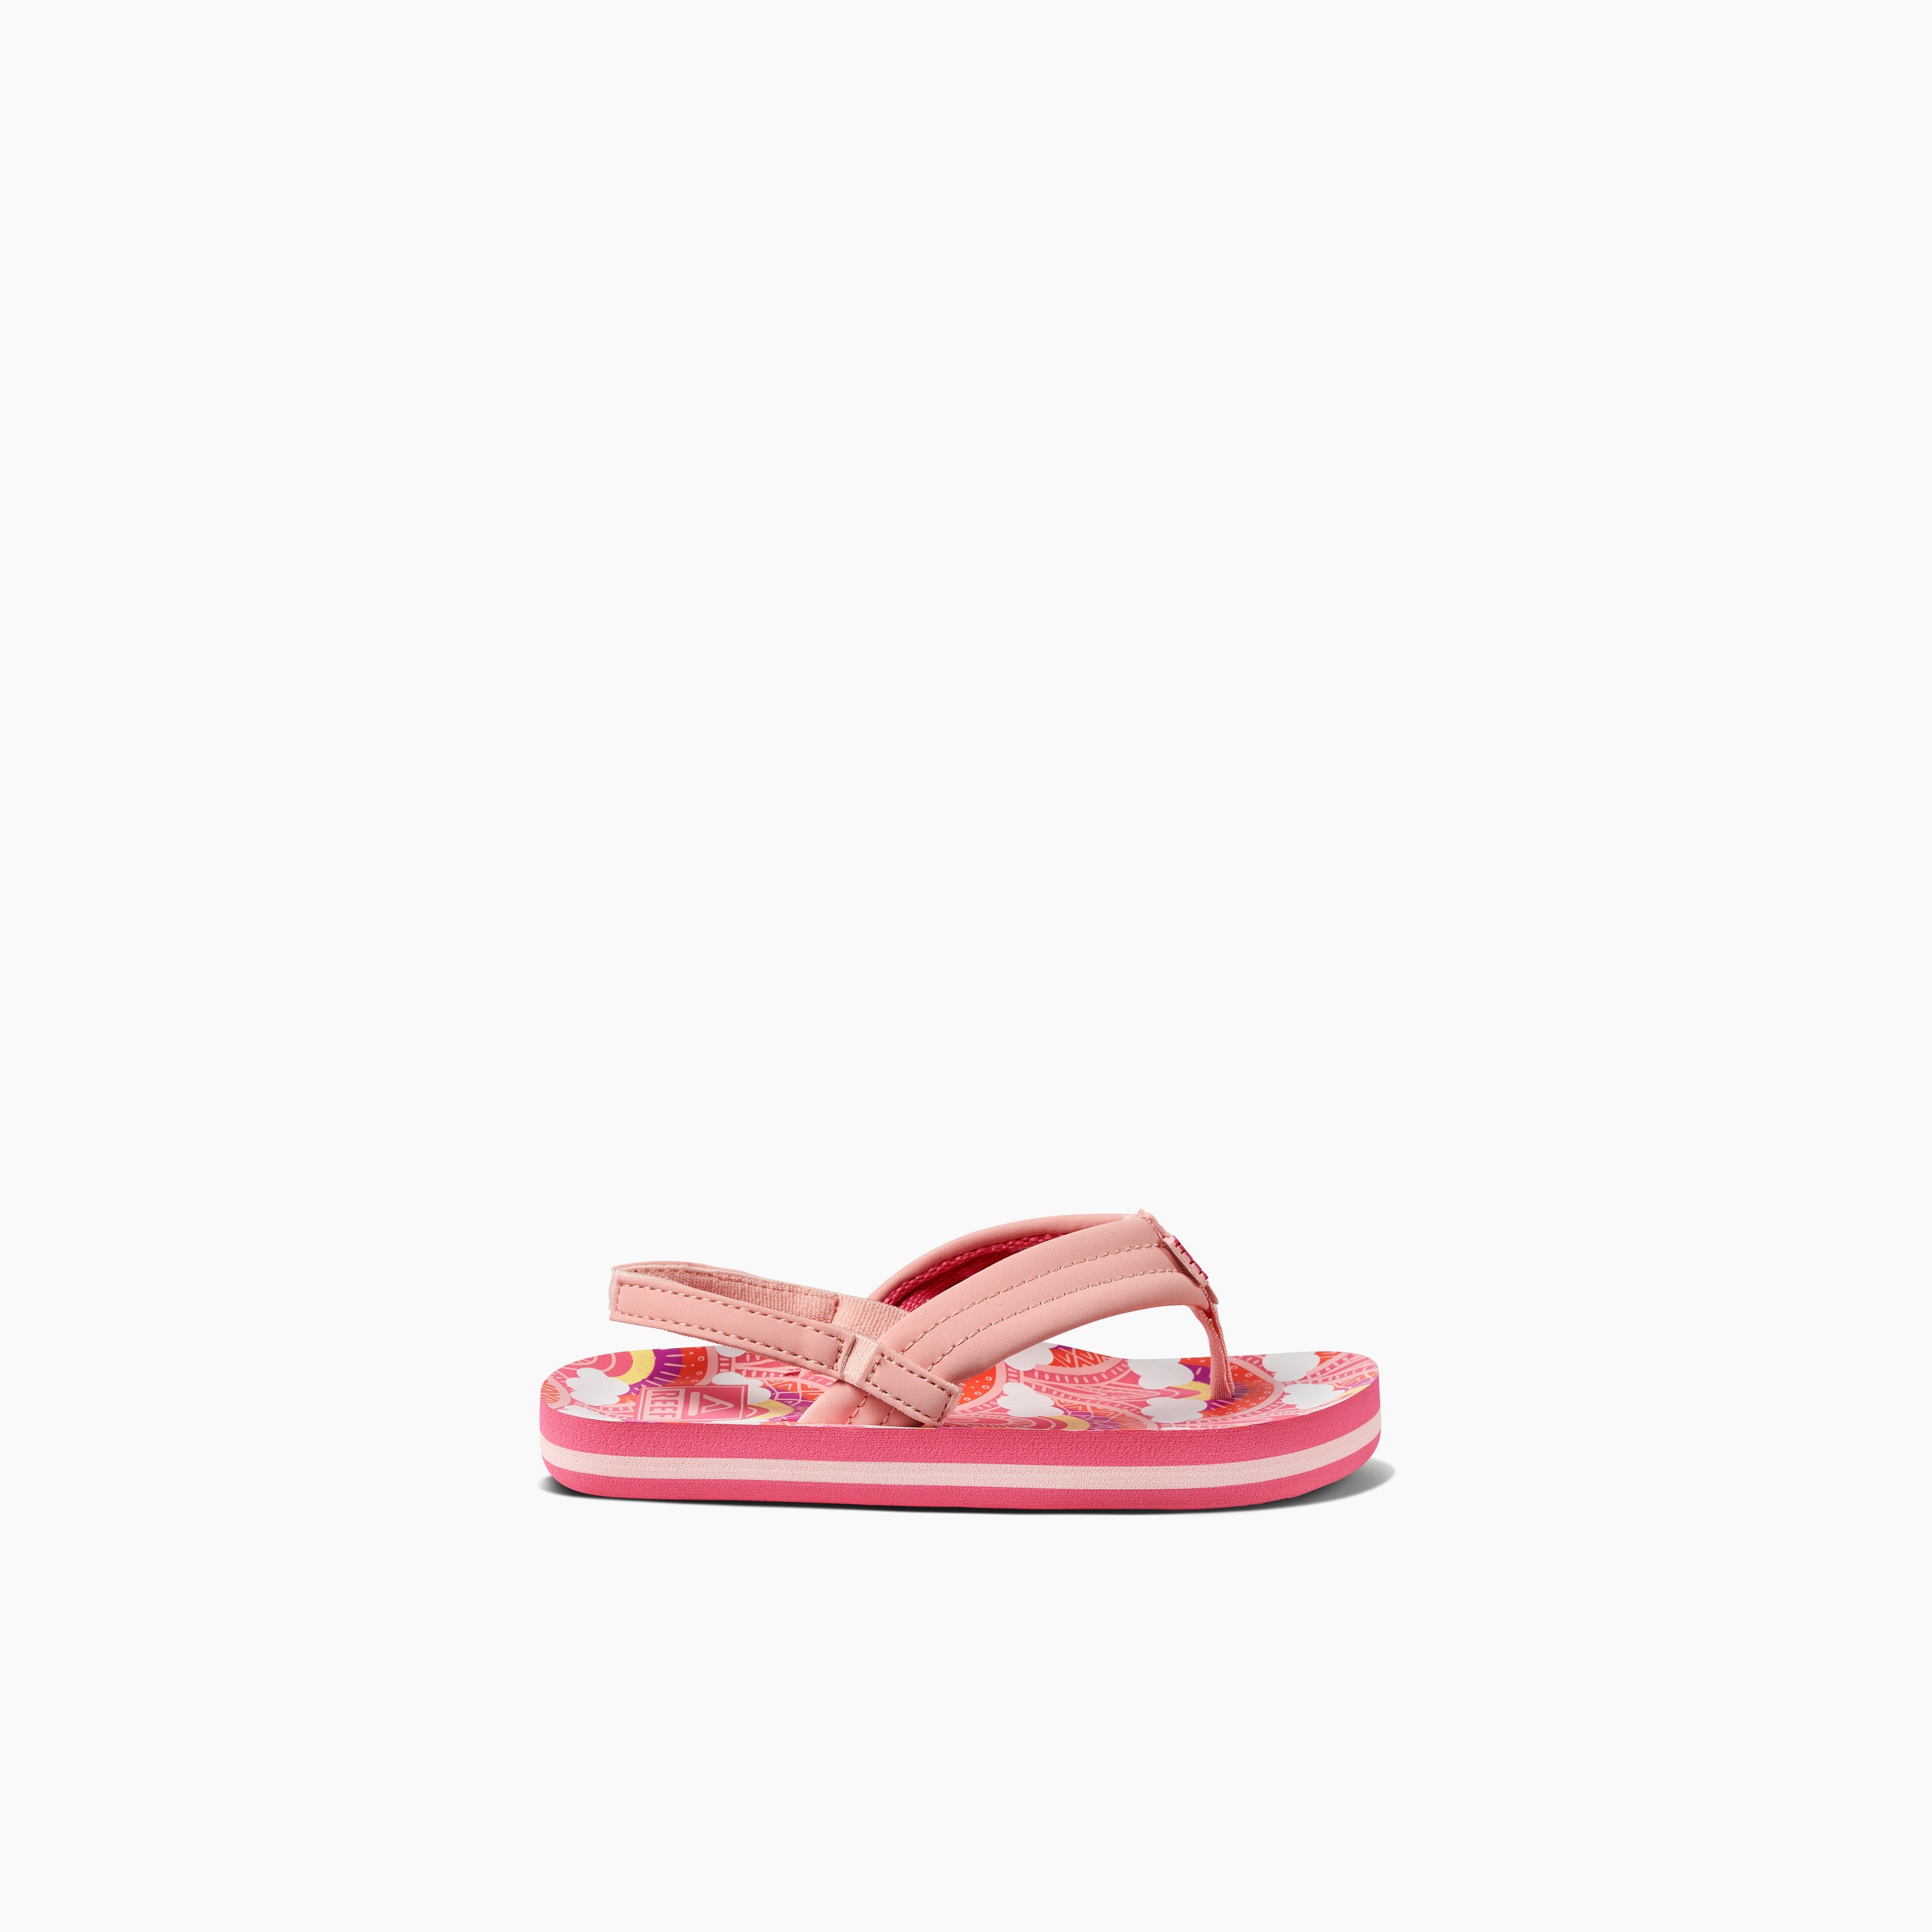 Toddler Girl's Ahi Sandals in Rainbows and Clouds side view